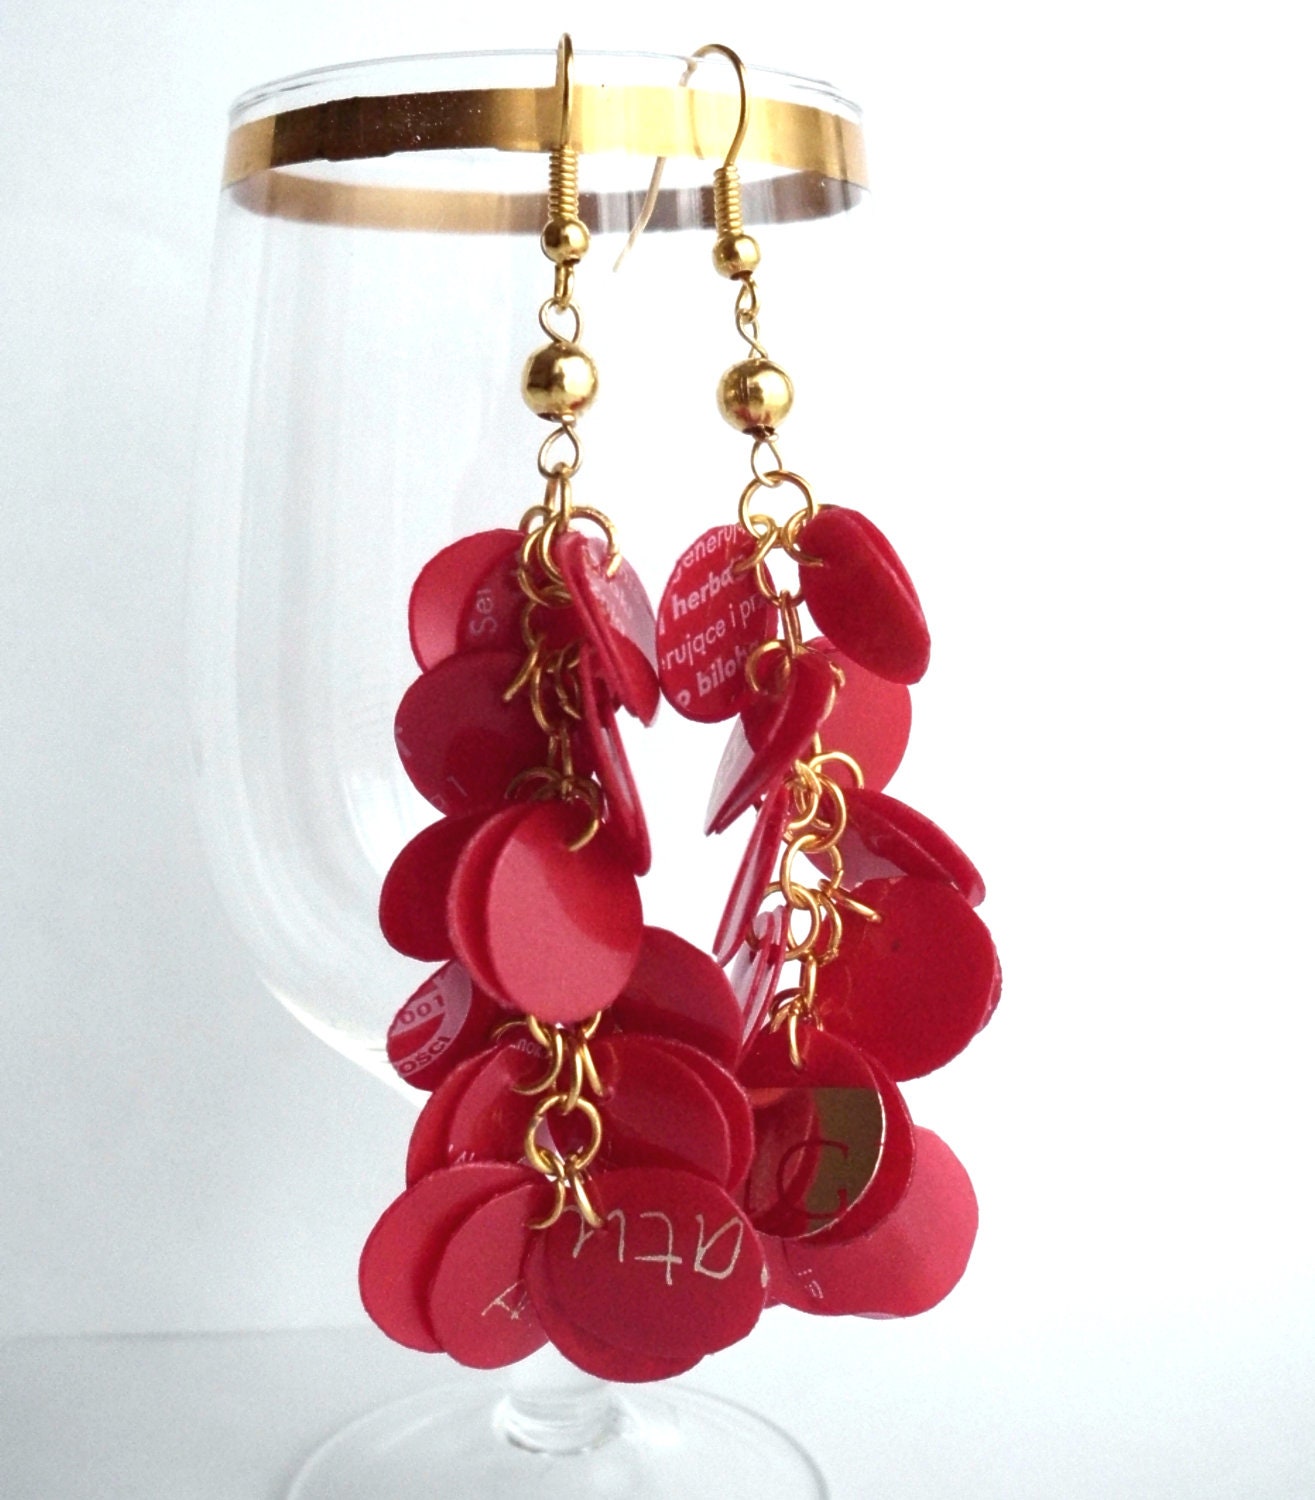 Red & gold eco friendly earrings made of recycled plastic - upcycled jewelry, sustainable, gift for christmas, valentine's day - dekoprojects